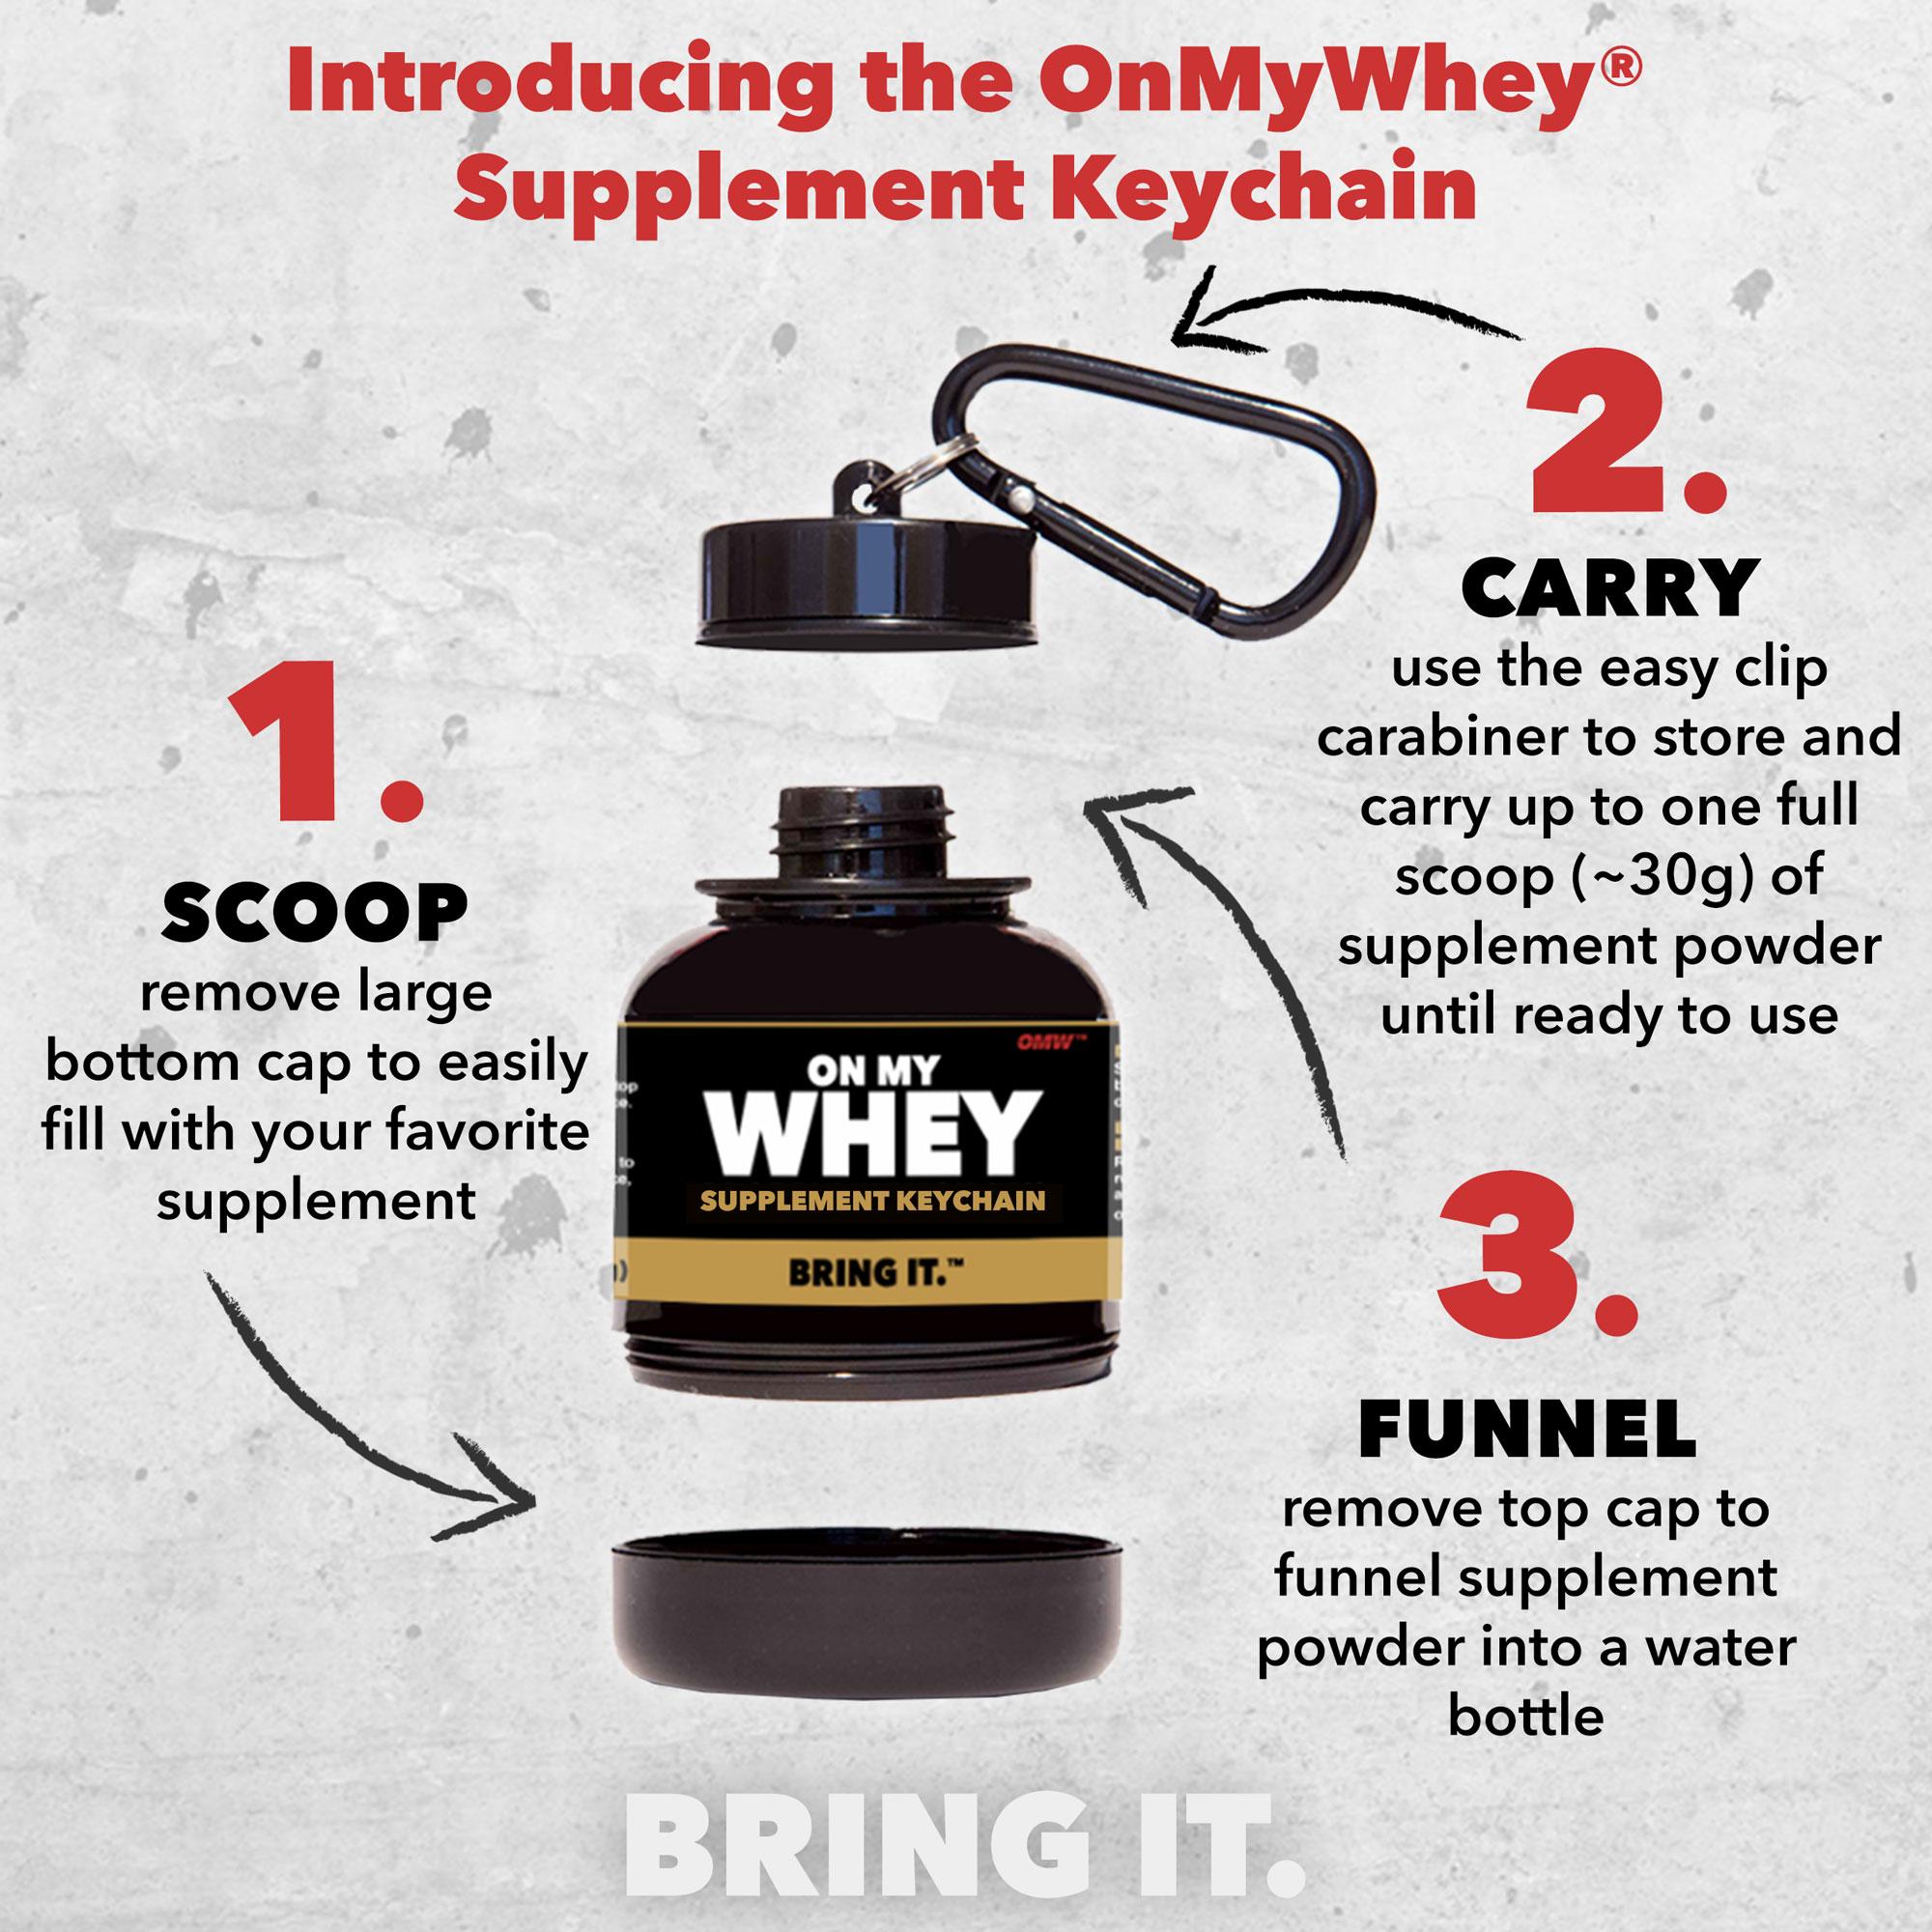 OnMyWhey - Portable Protein and Supplement Powder Funnel Keychain